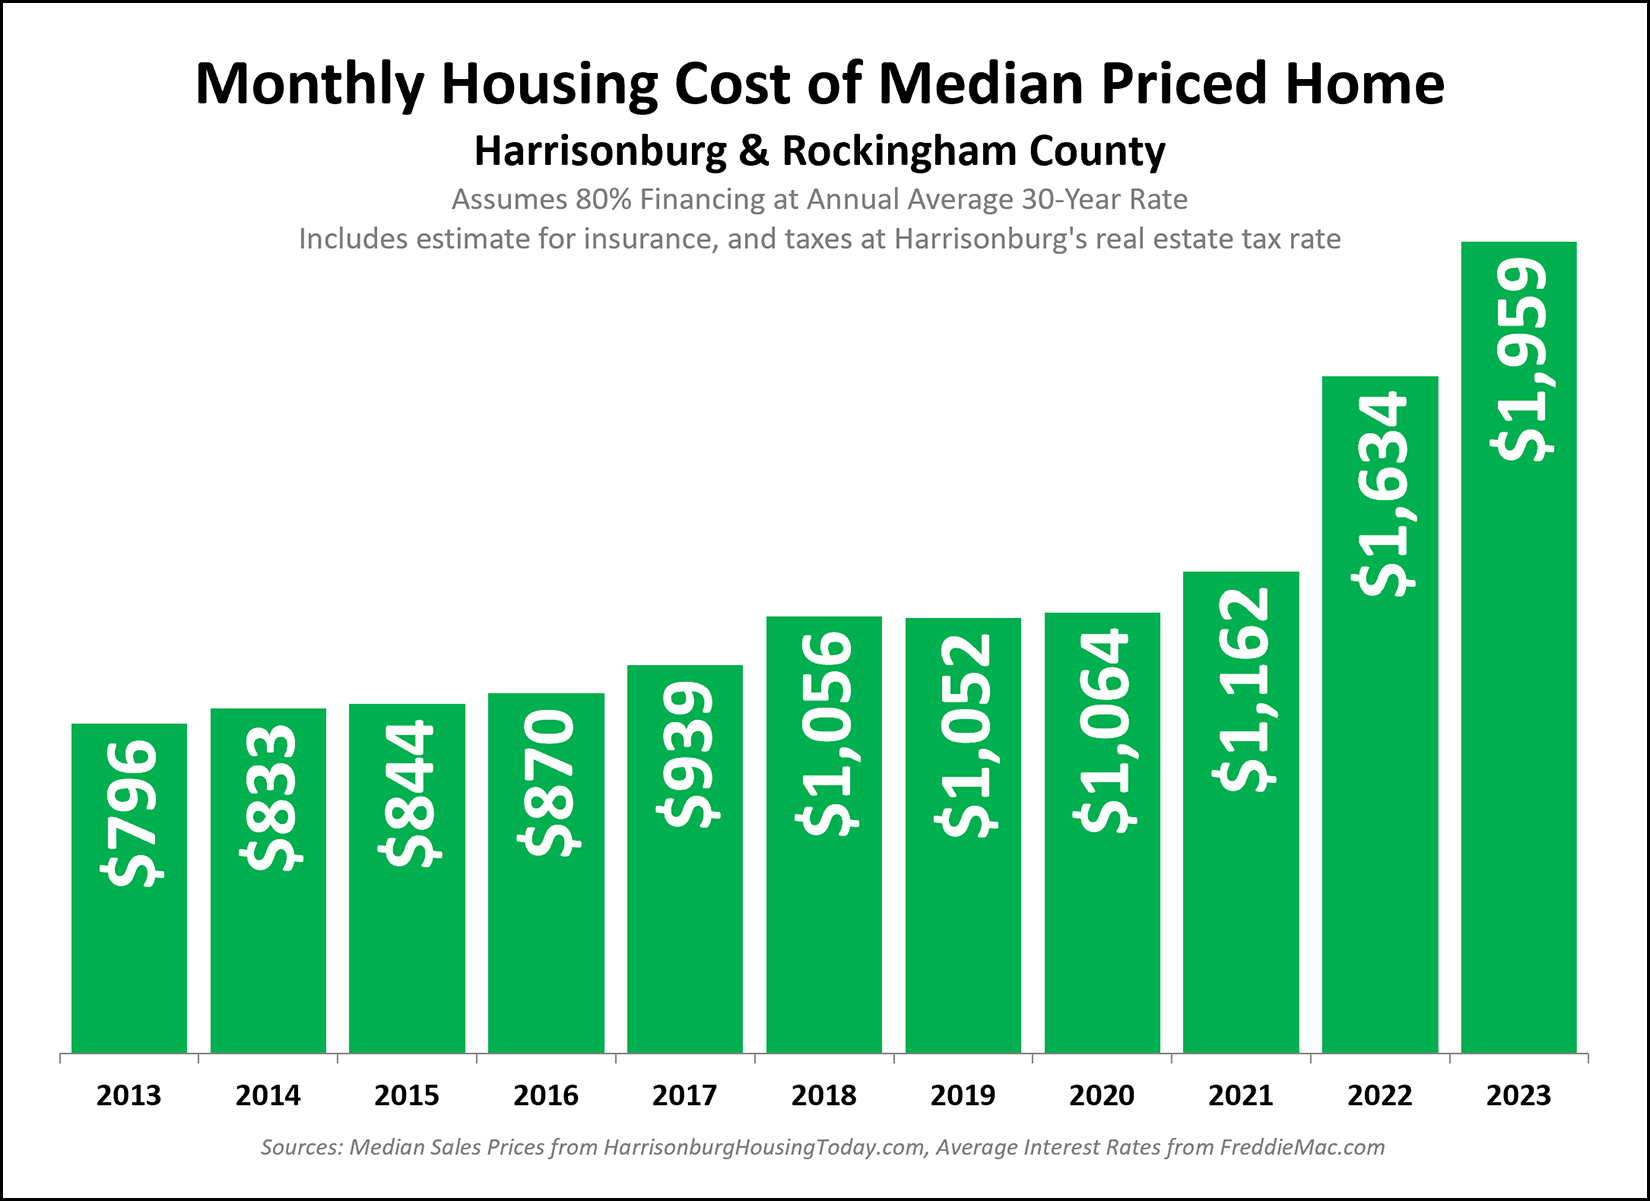 Monthly Housing Costs